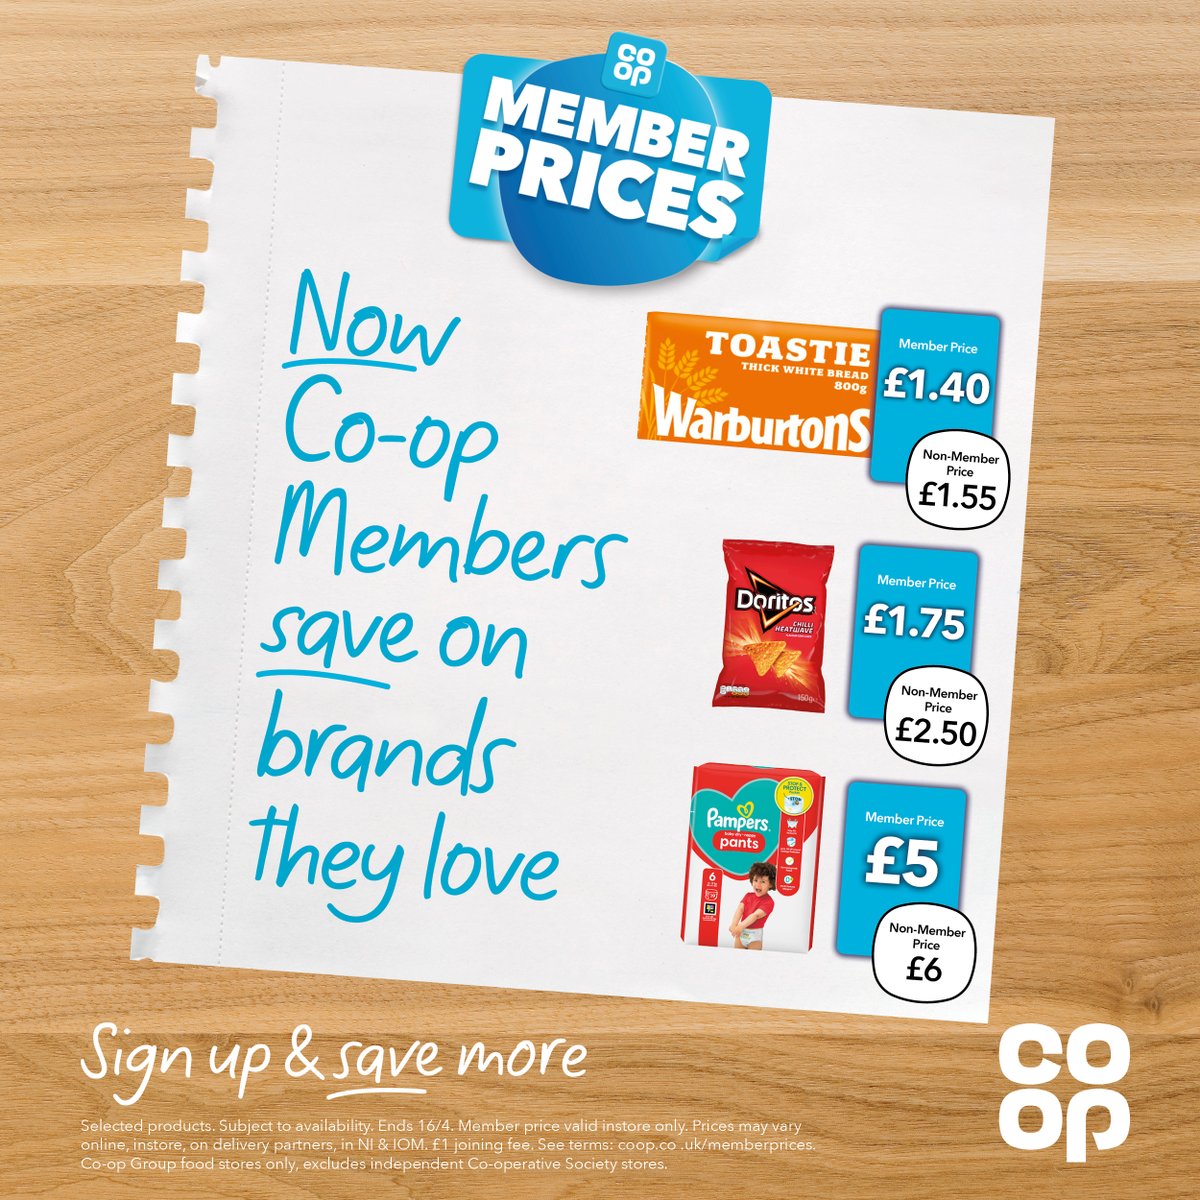 Now @coopuk Members save on brands they love like Warburtons and Cadbury 🍞🍫 Sign up now coop.co.uk/membership